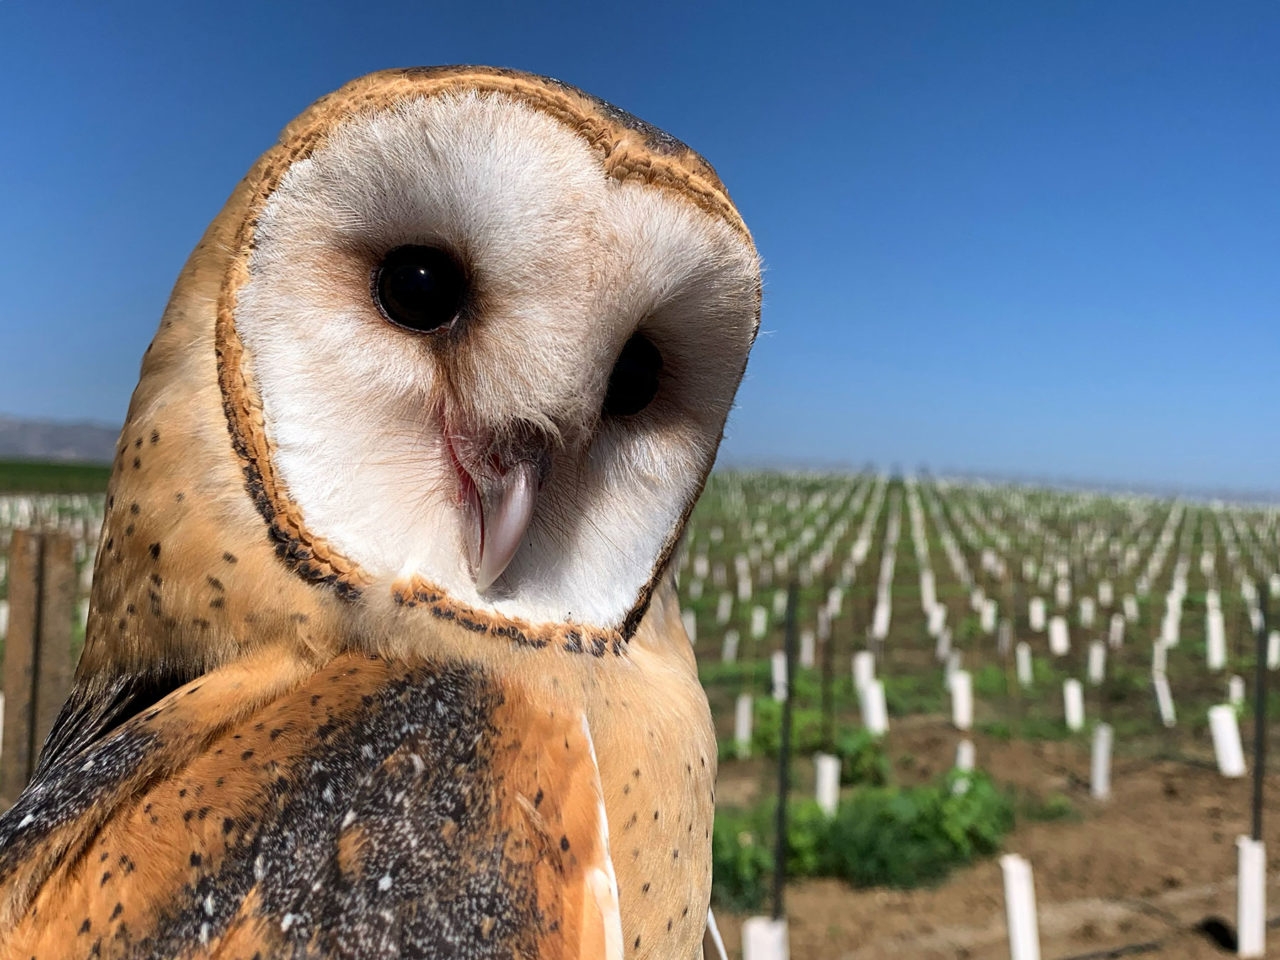 Barn owl in a central valley vineyard. Photo by Ryan Bourbour